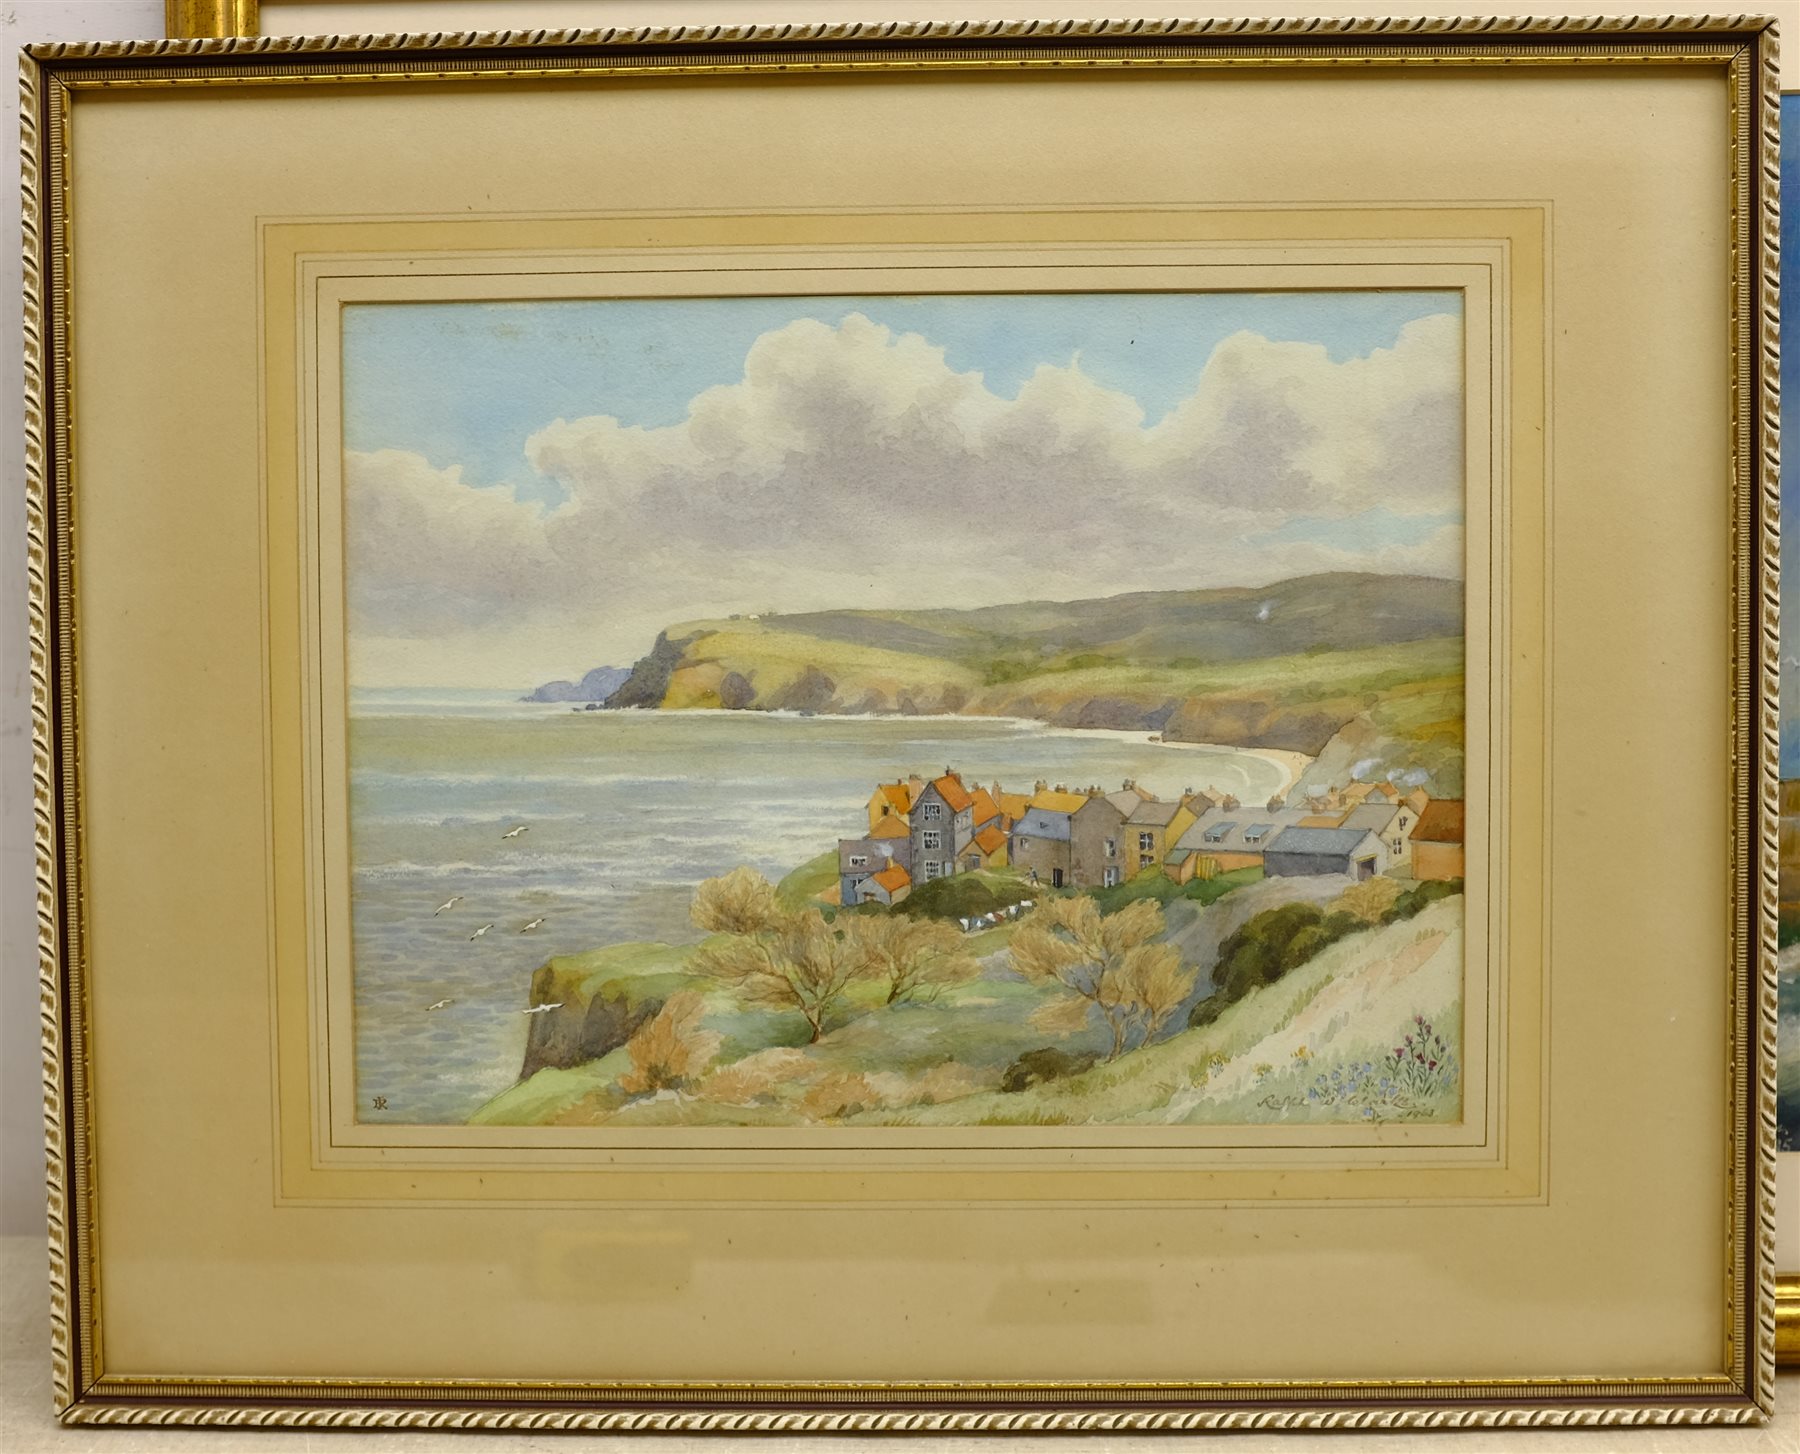 Ralph W Clarke (British 20th century): 'Robin Hood's Bay', watercolour signed and dated 1963, titled - Image 2 of 2